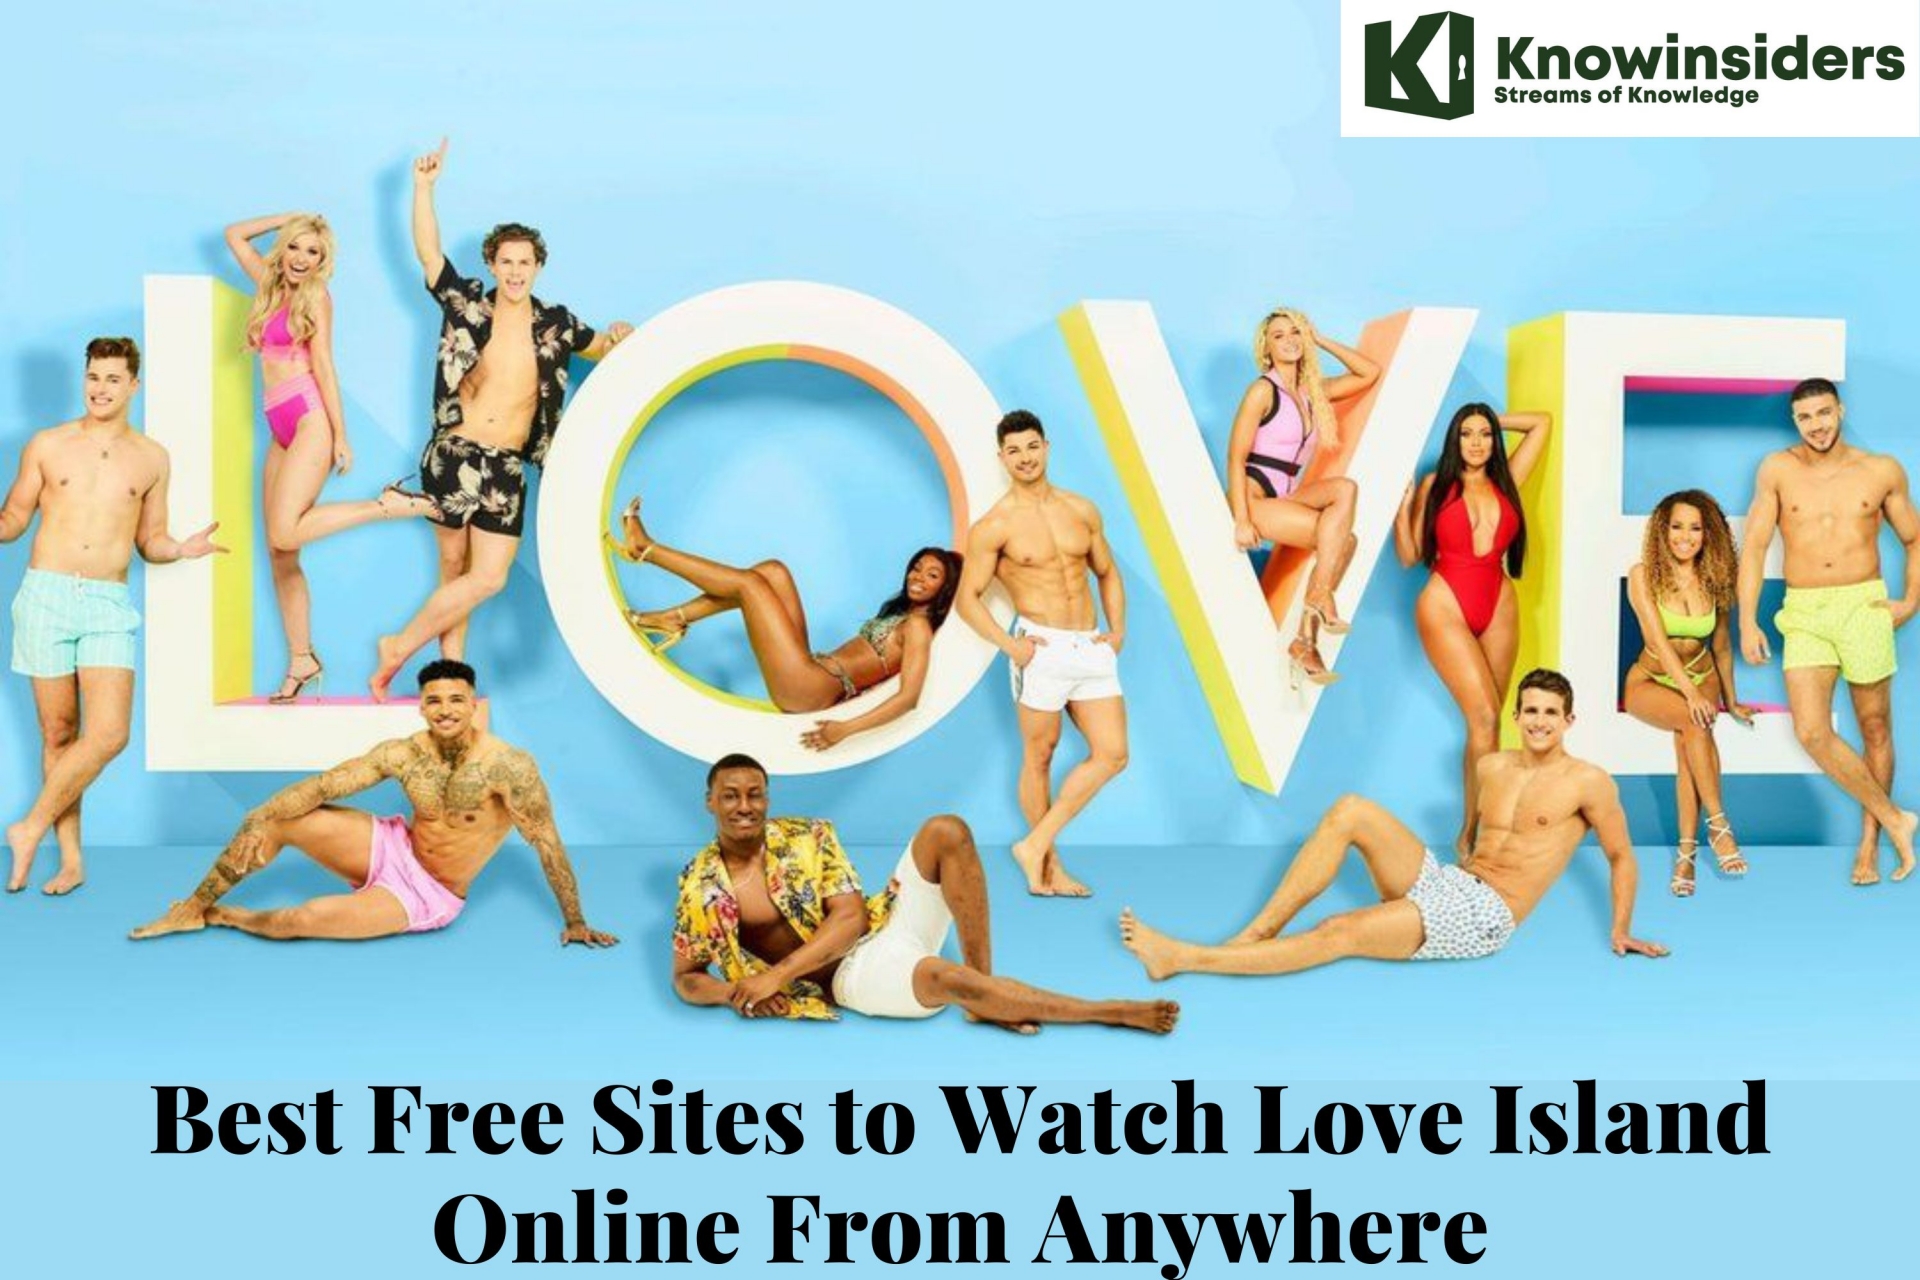 Best Free Sites to Watch Love Island Online From Anywhere